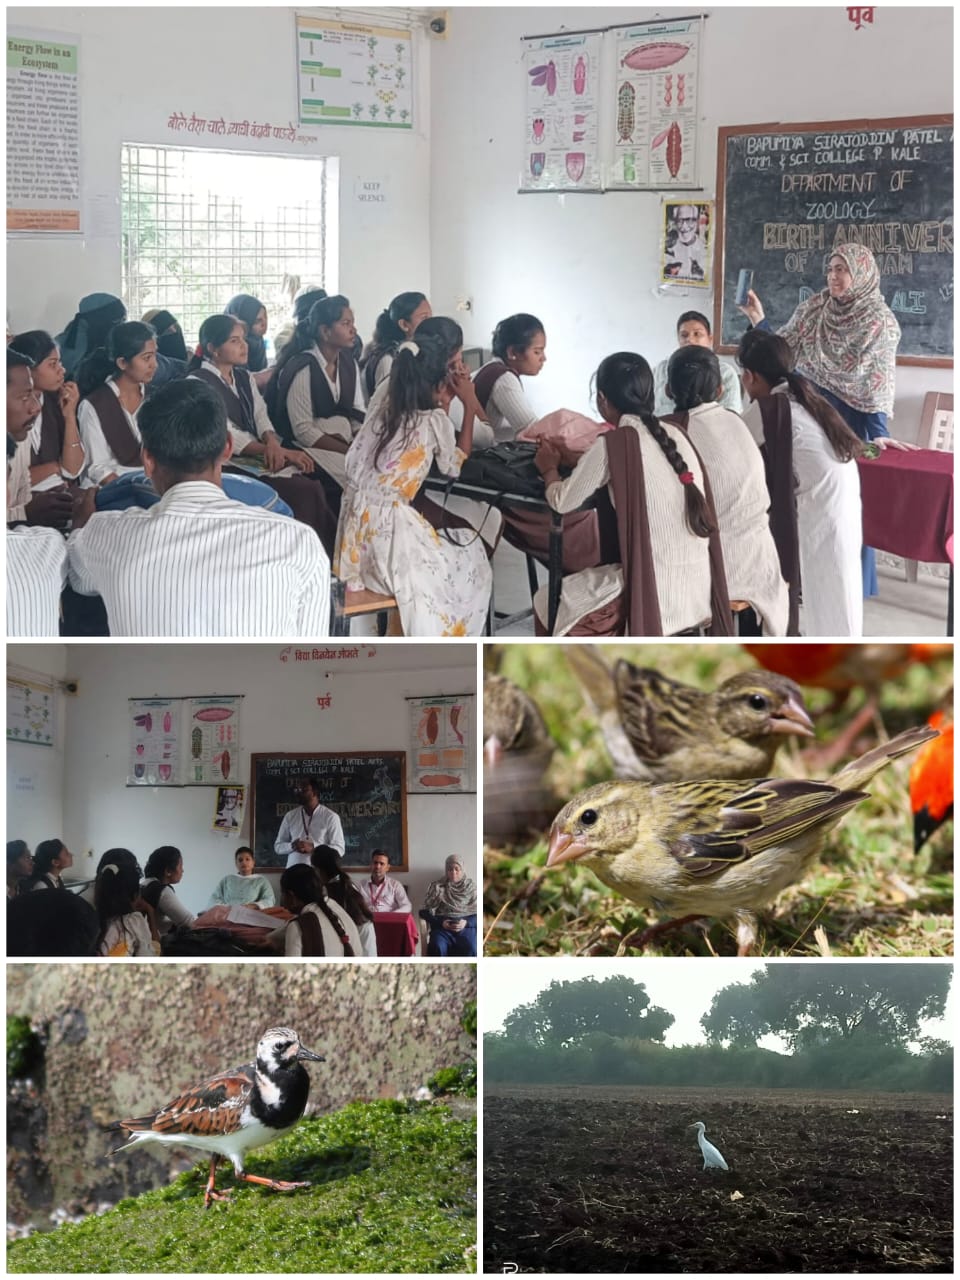 Bird week celebration by department of Zoology